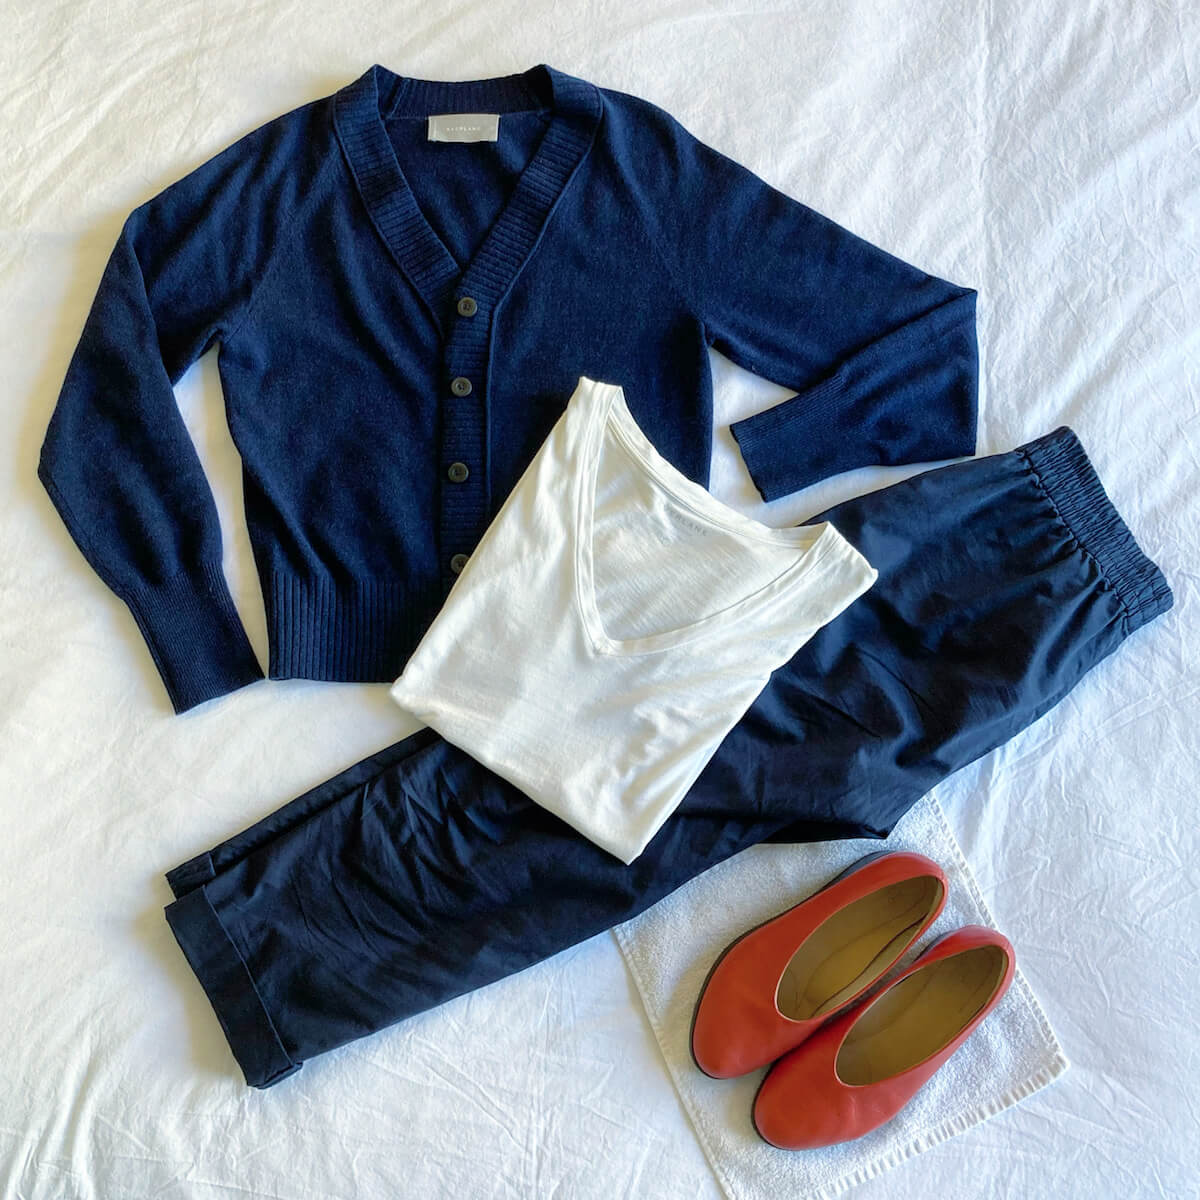 Flat lay of cardigan, navy pants, white t-shirt, and red shoes.